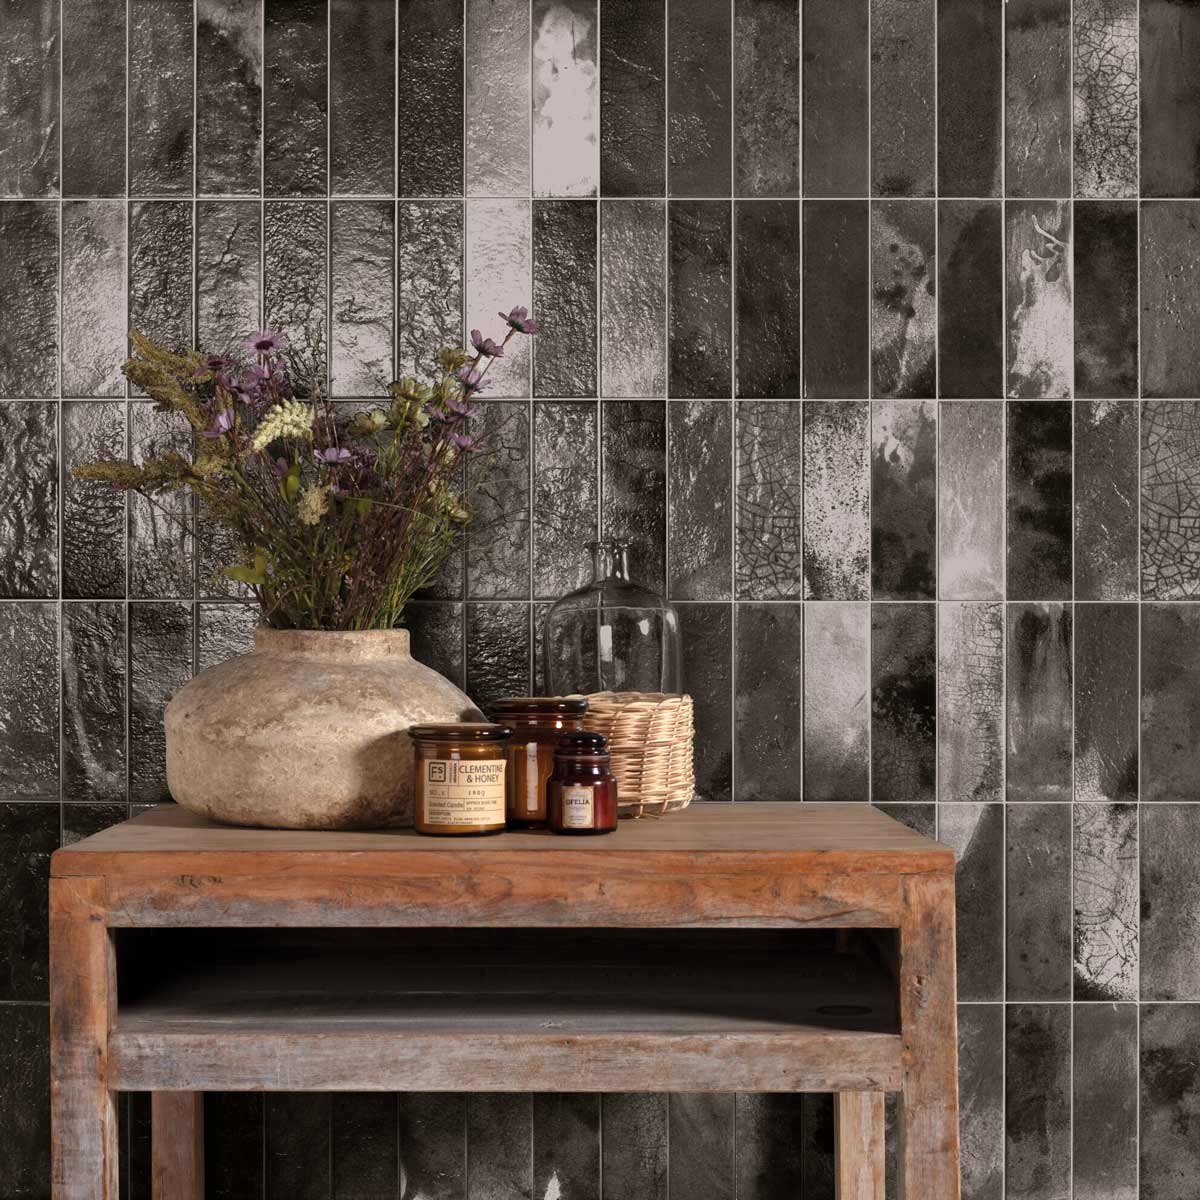 20x40cm Raku black metallic glaze ceramic tile wall with wooden kitchen side tables and ornaments